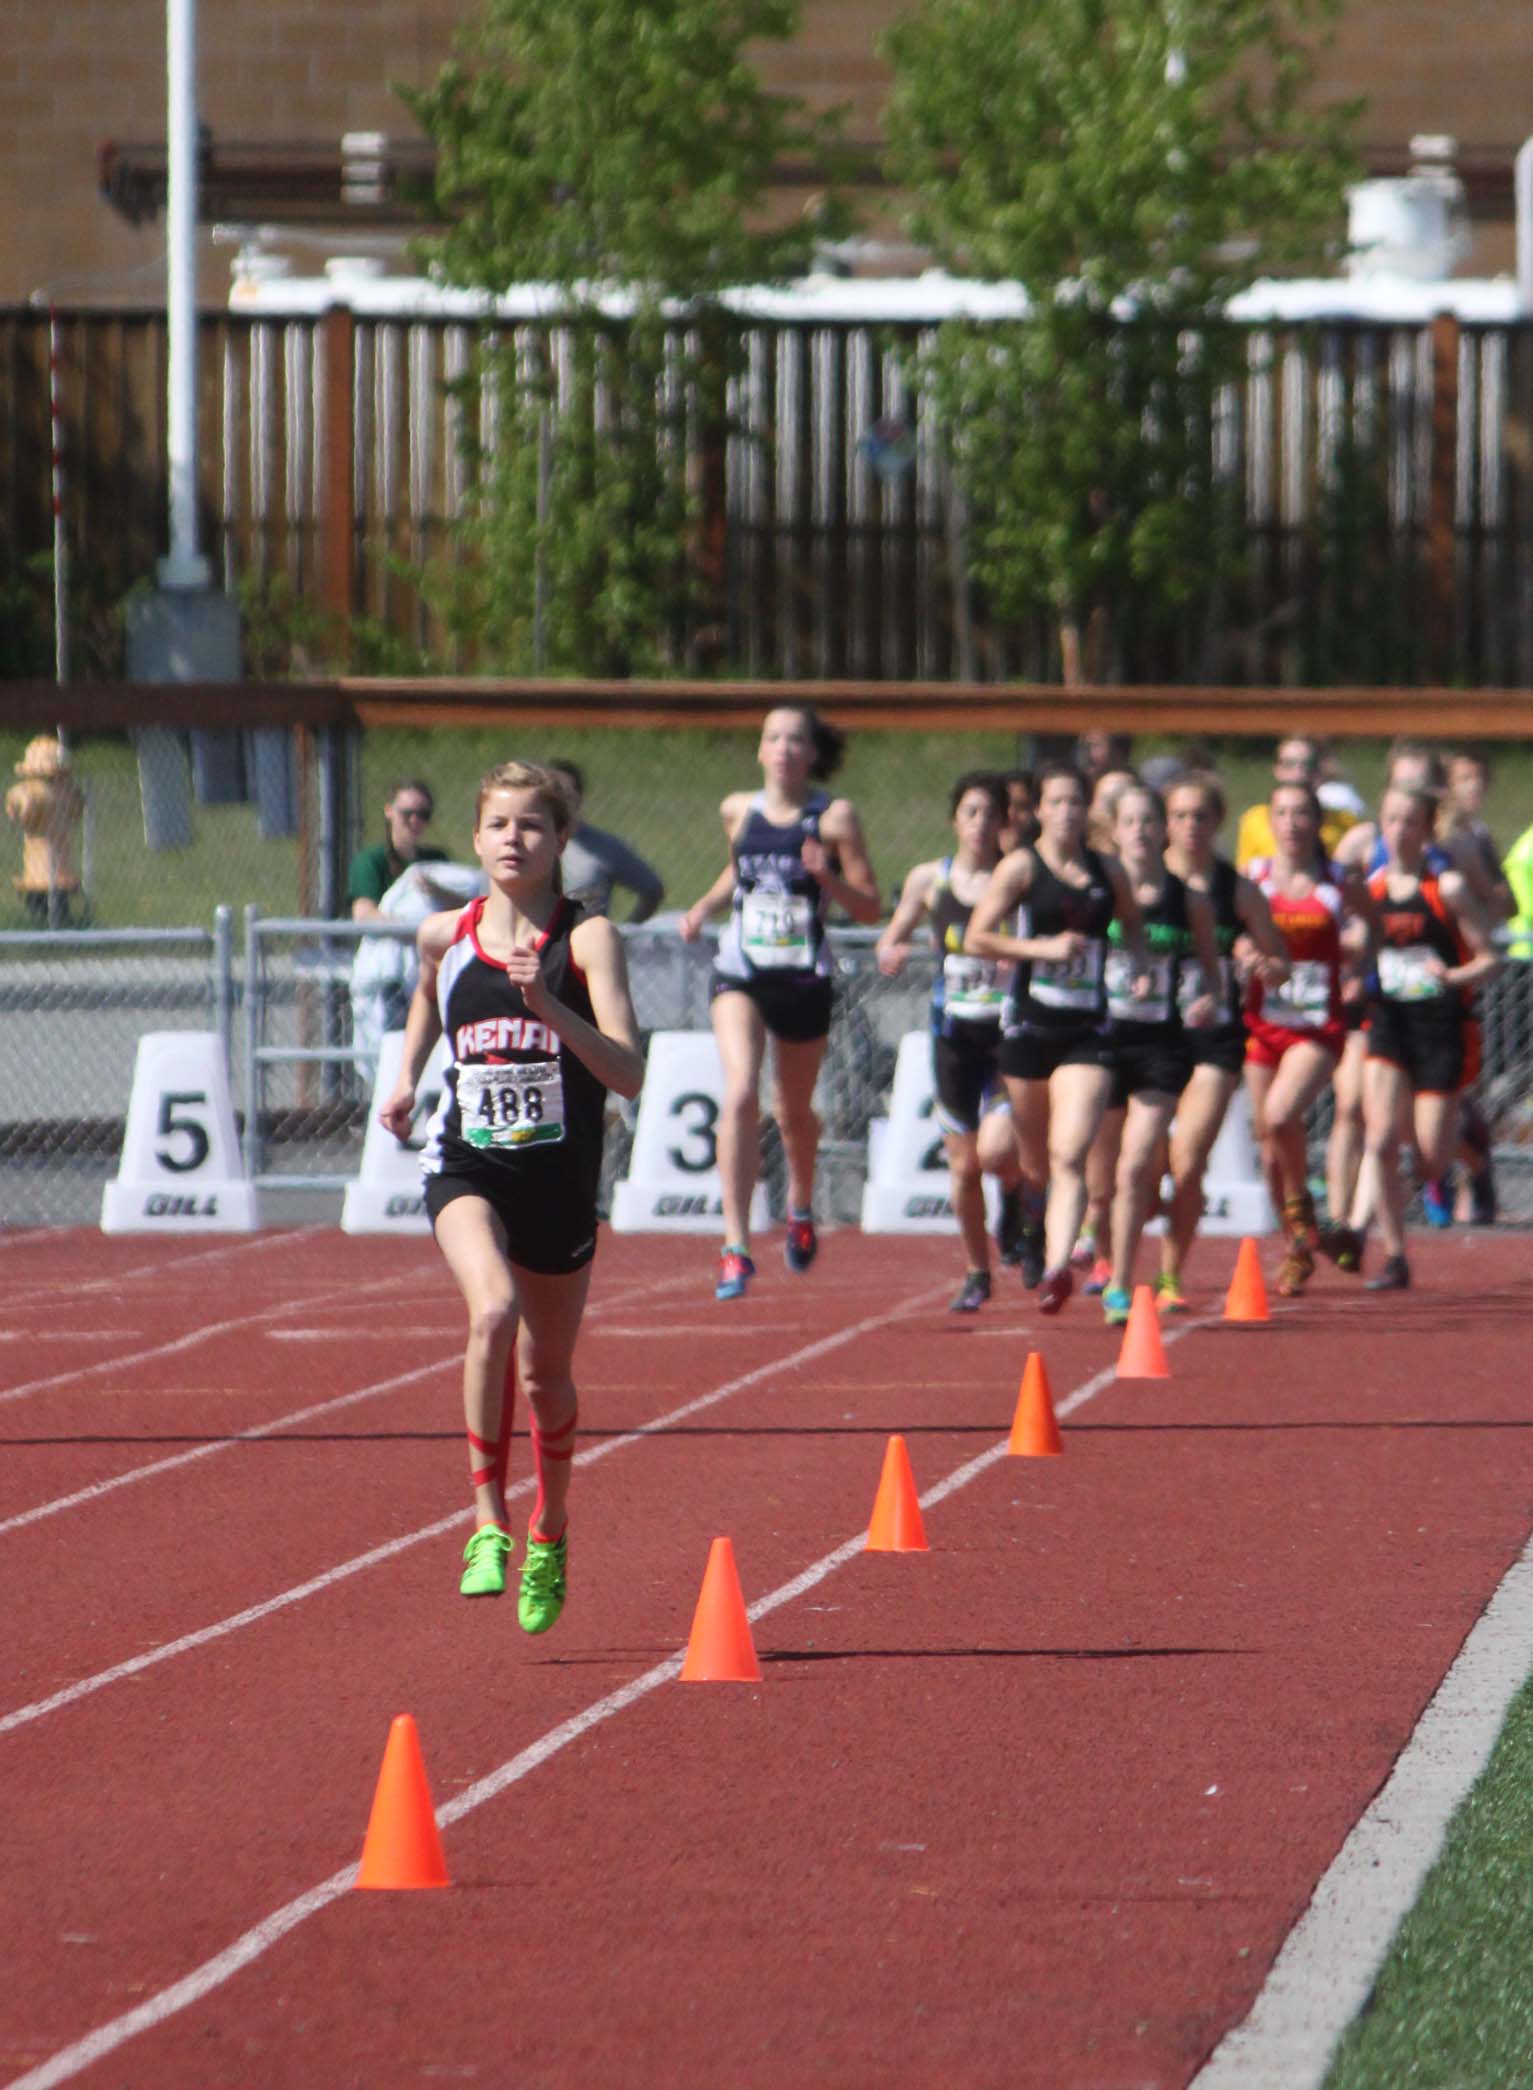 Kenai Central senior Allie Ostrander leads the field around at the conclusion of the first lap in Friday's 4A girls 3,200 meter race at the Alaska state track and field meet at Dimond Alumni Field in Anchorage.